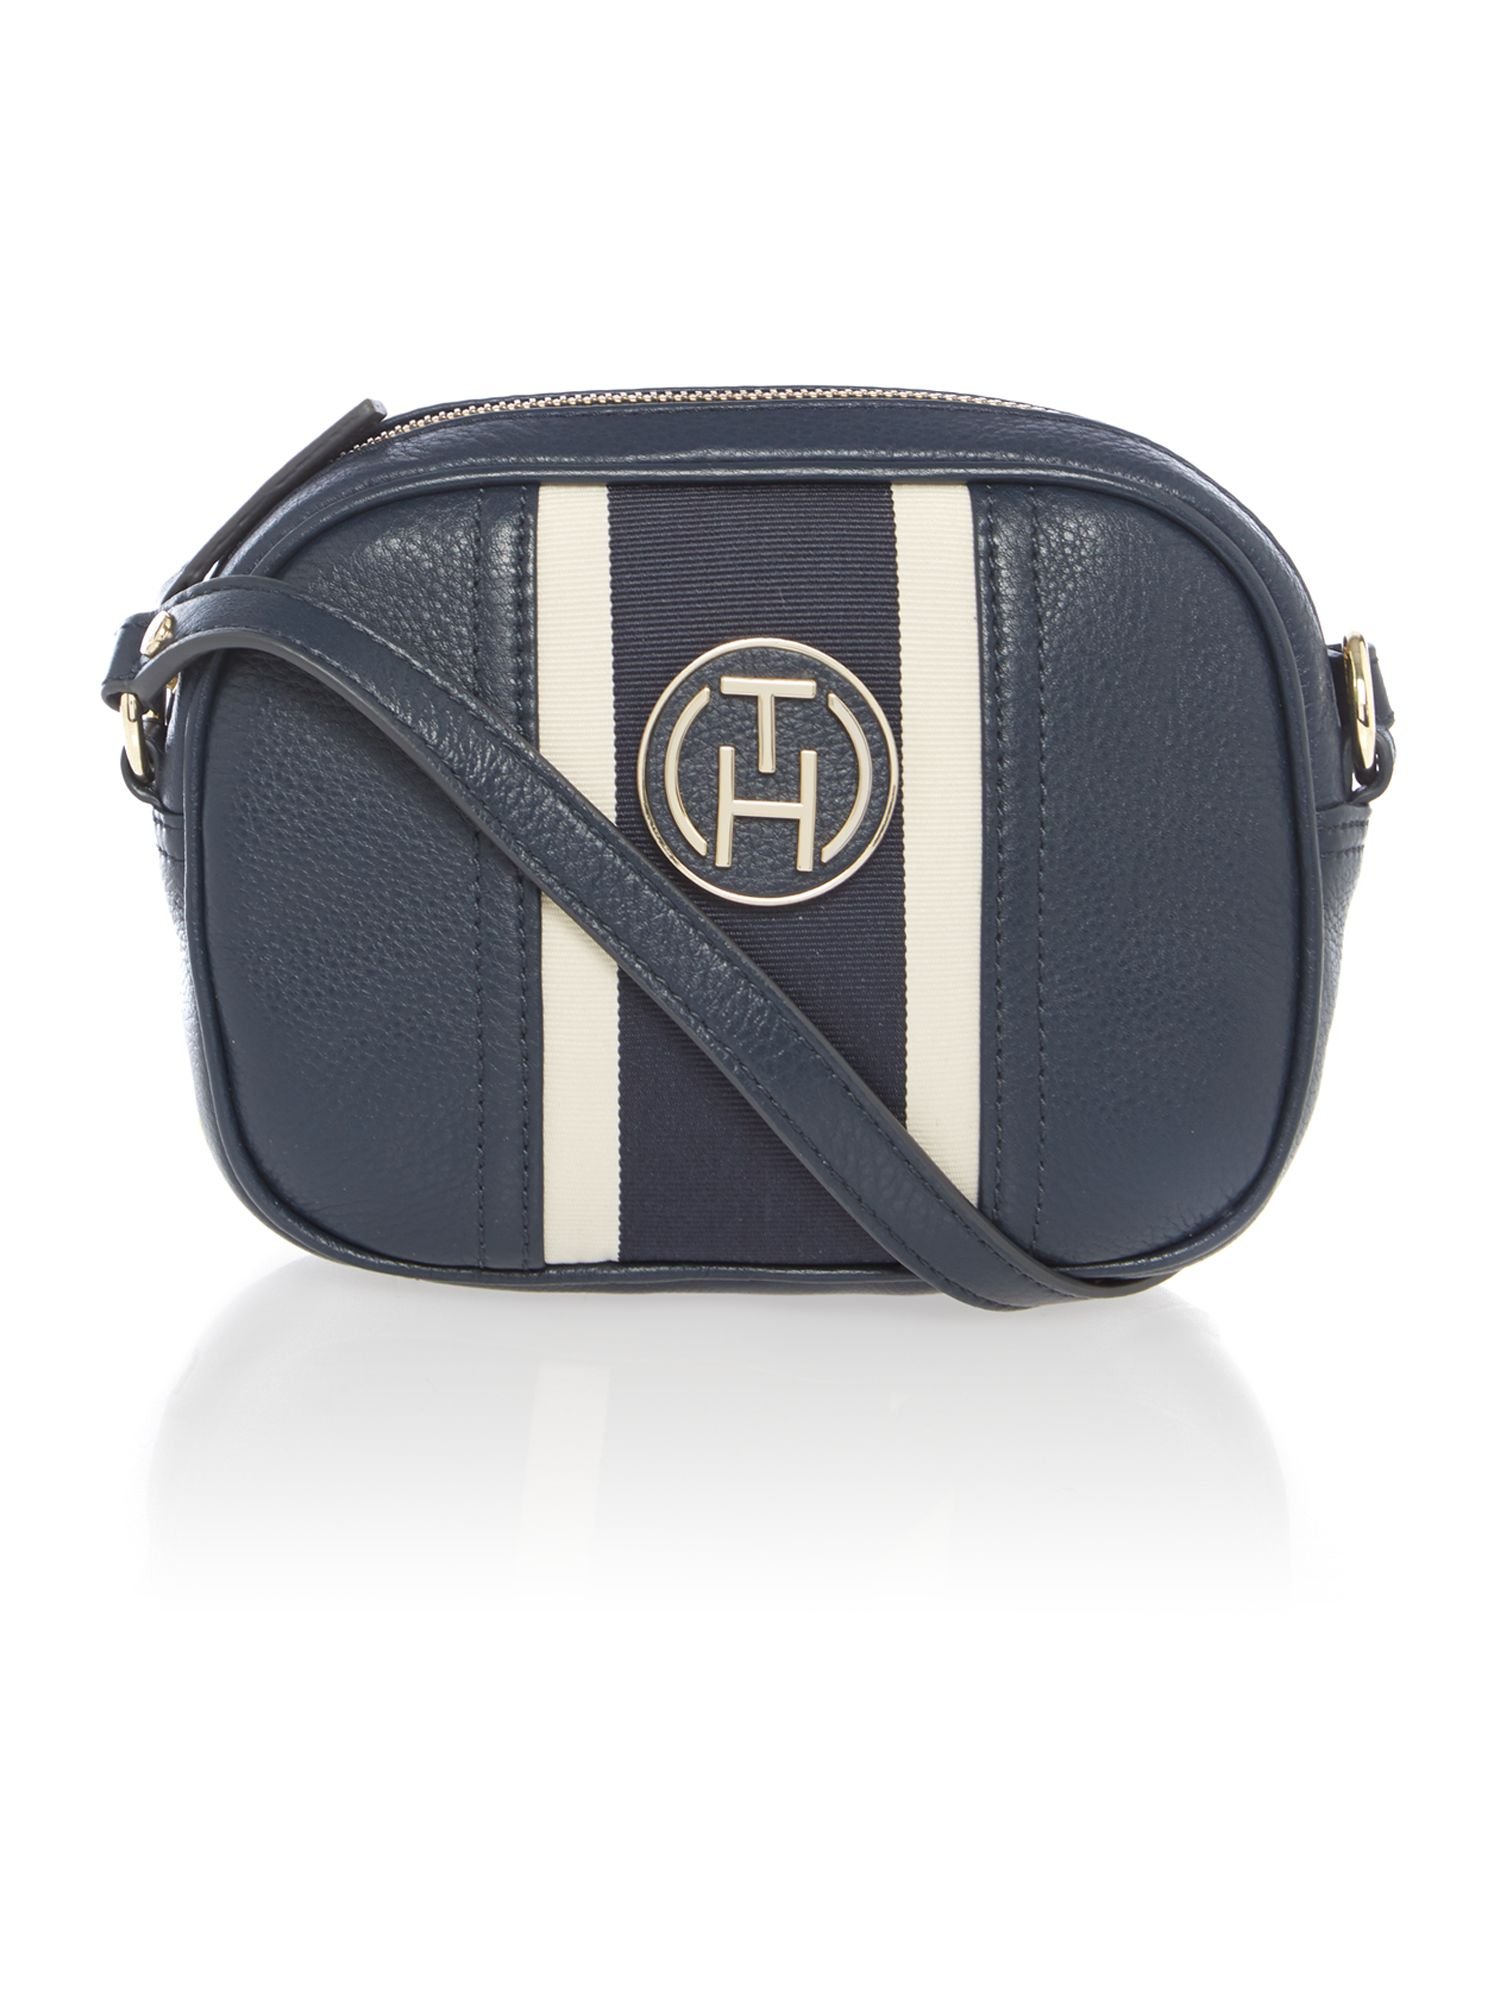 Tommy hilfiger Claire Navy Small Cross Body Bag in Blue (Navy) | Lyst